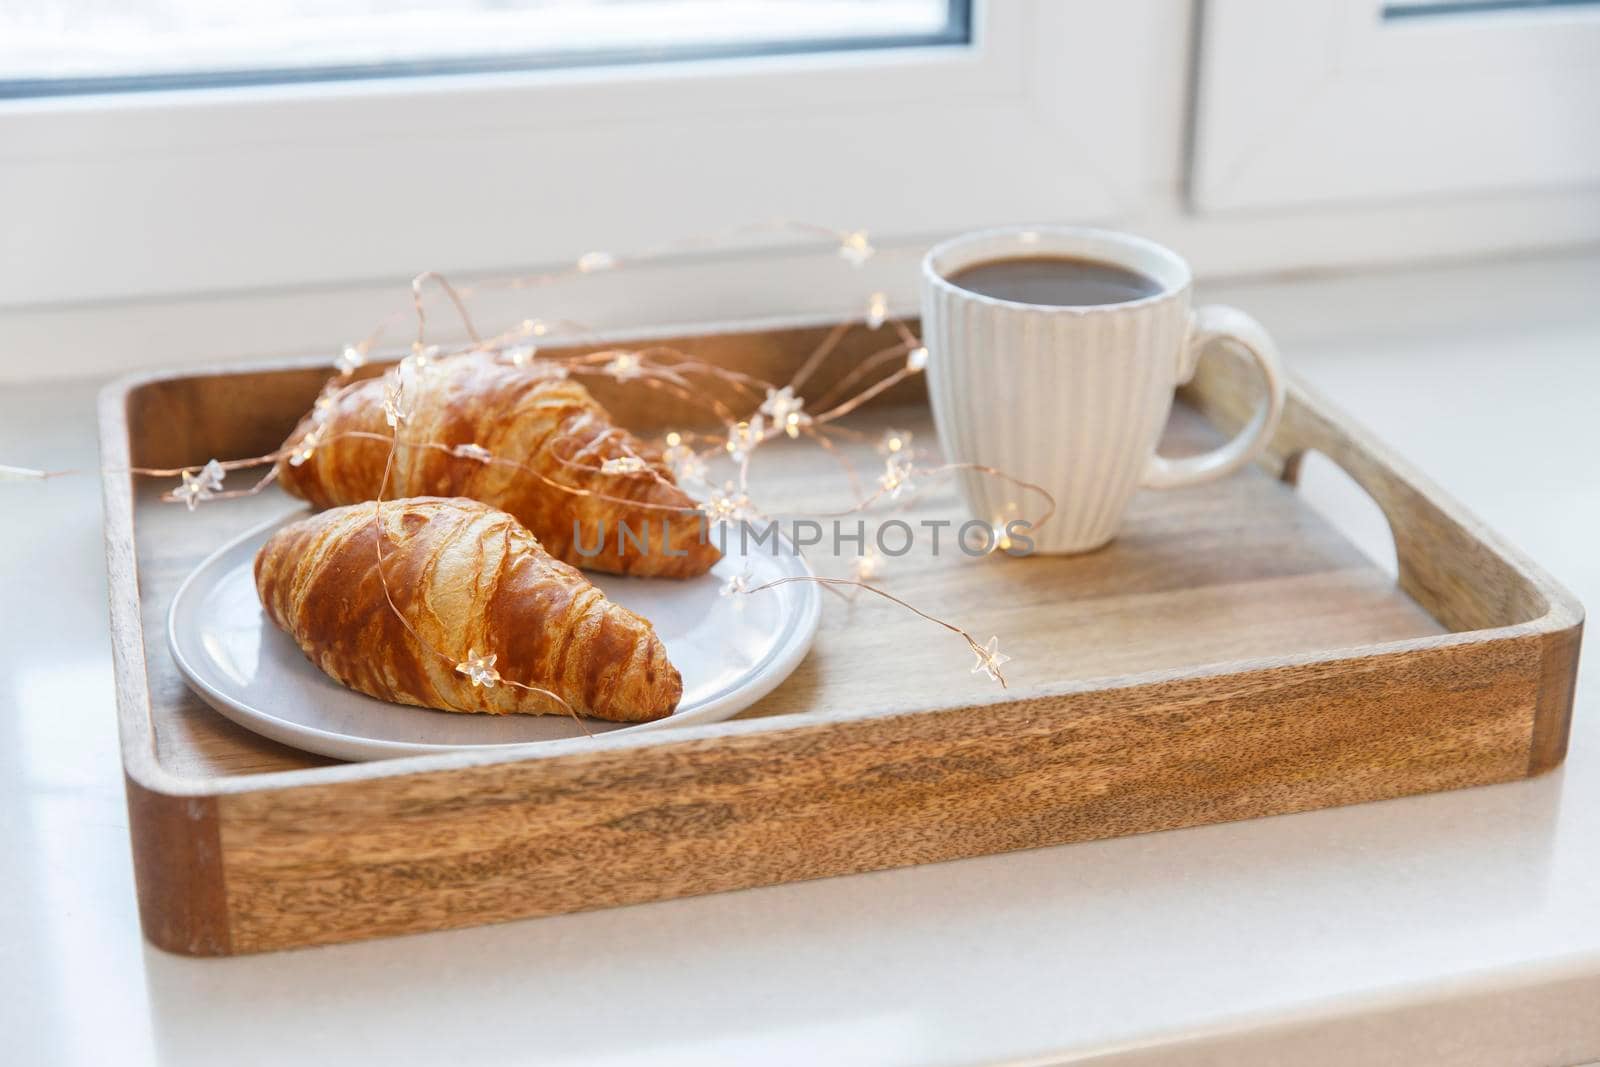 Freshly baked croissant on a gray round plate, white cup with coffee and garland on a tray on the table